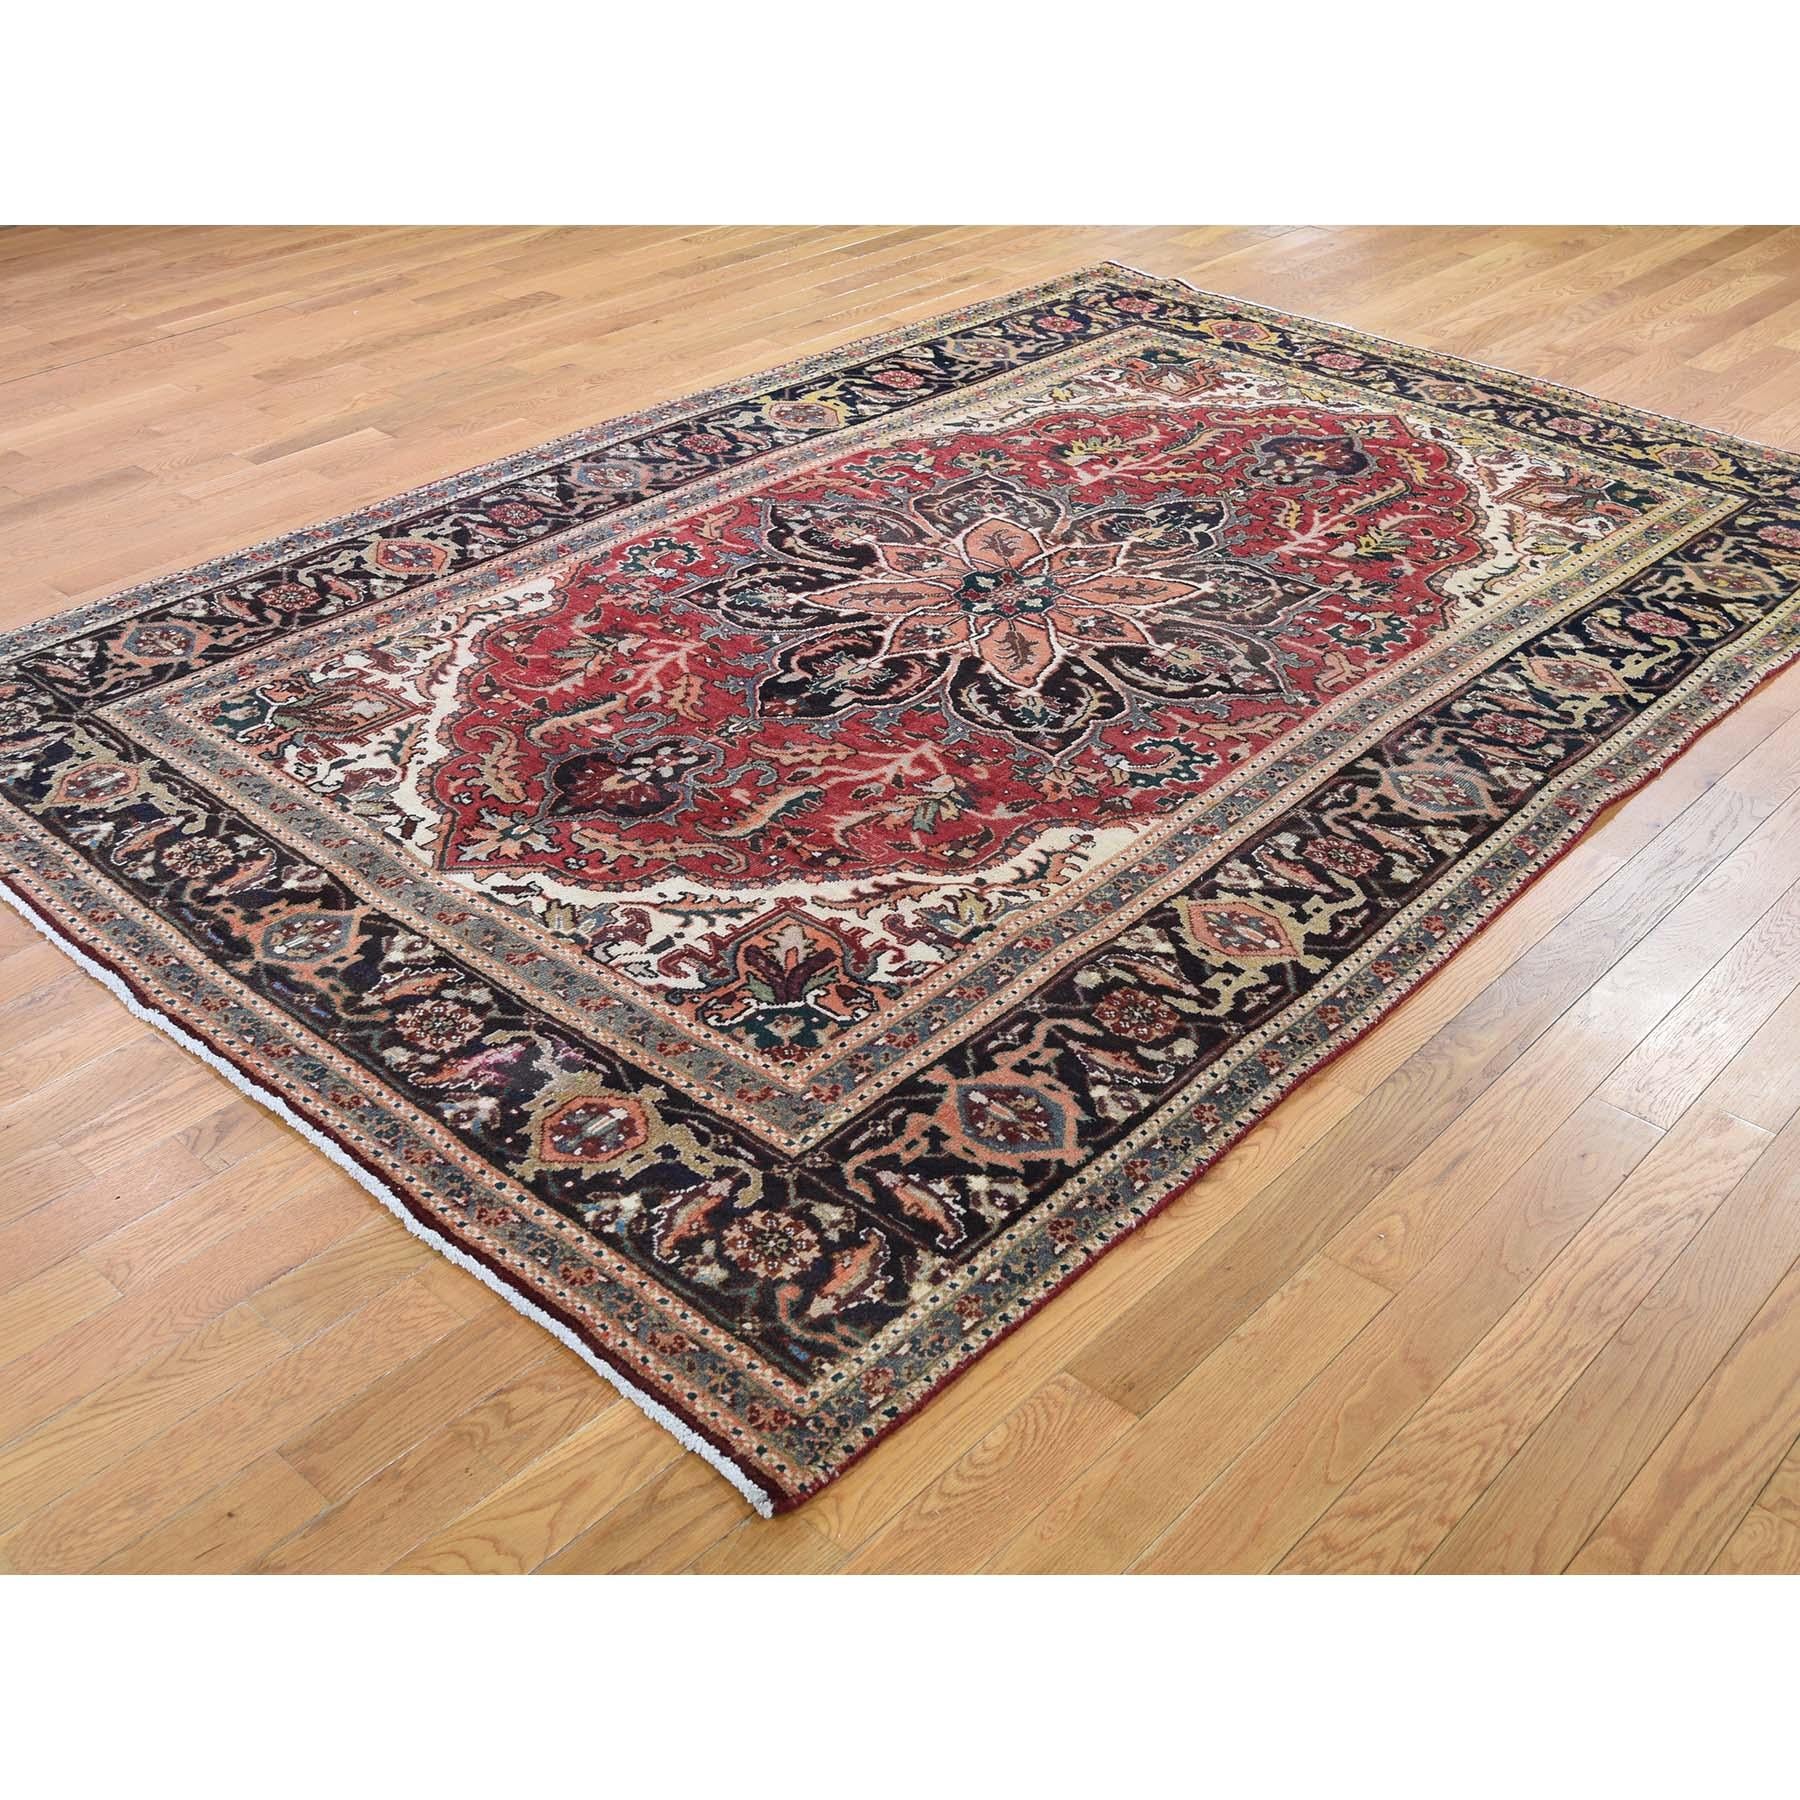 Turkish Semi Antique Persian Heriz Some Wear, Clean Hand-Knotted Oriental Rug, 6'4